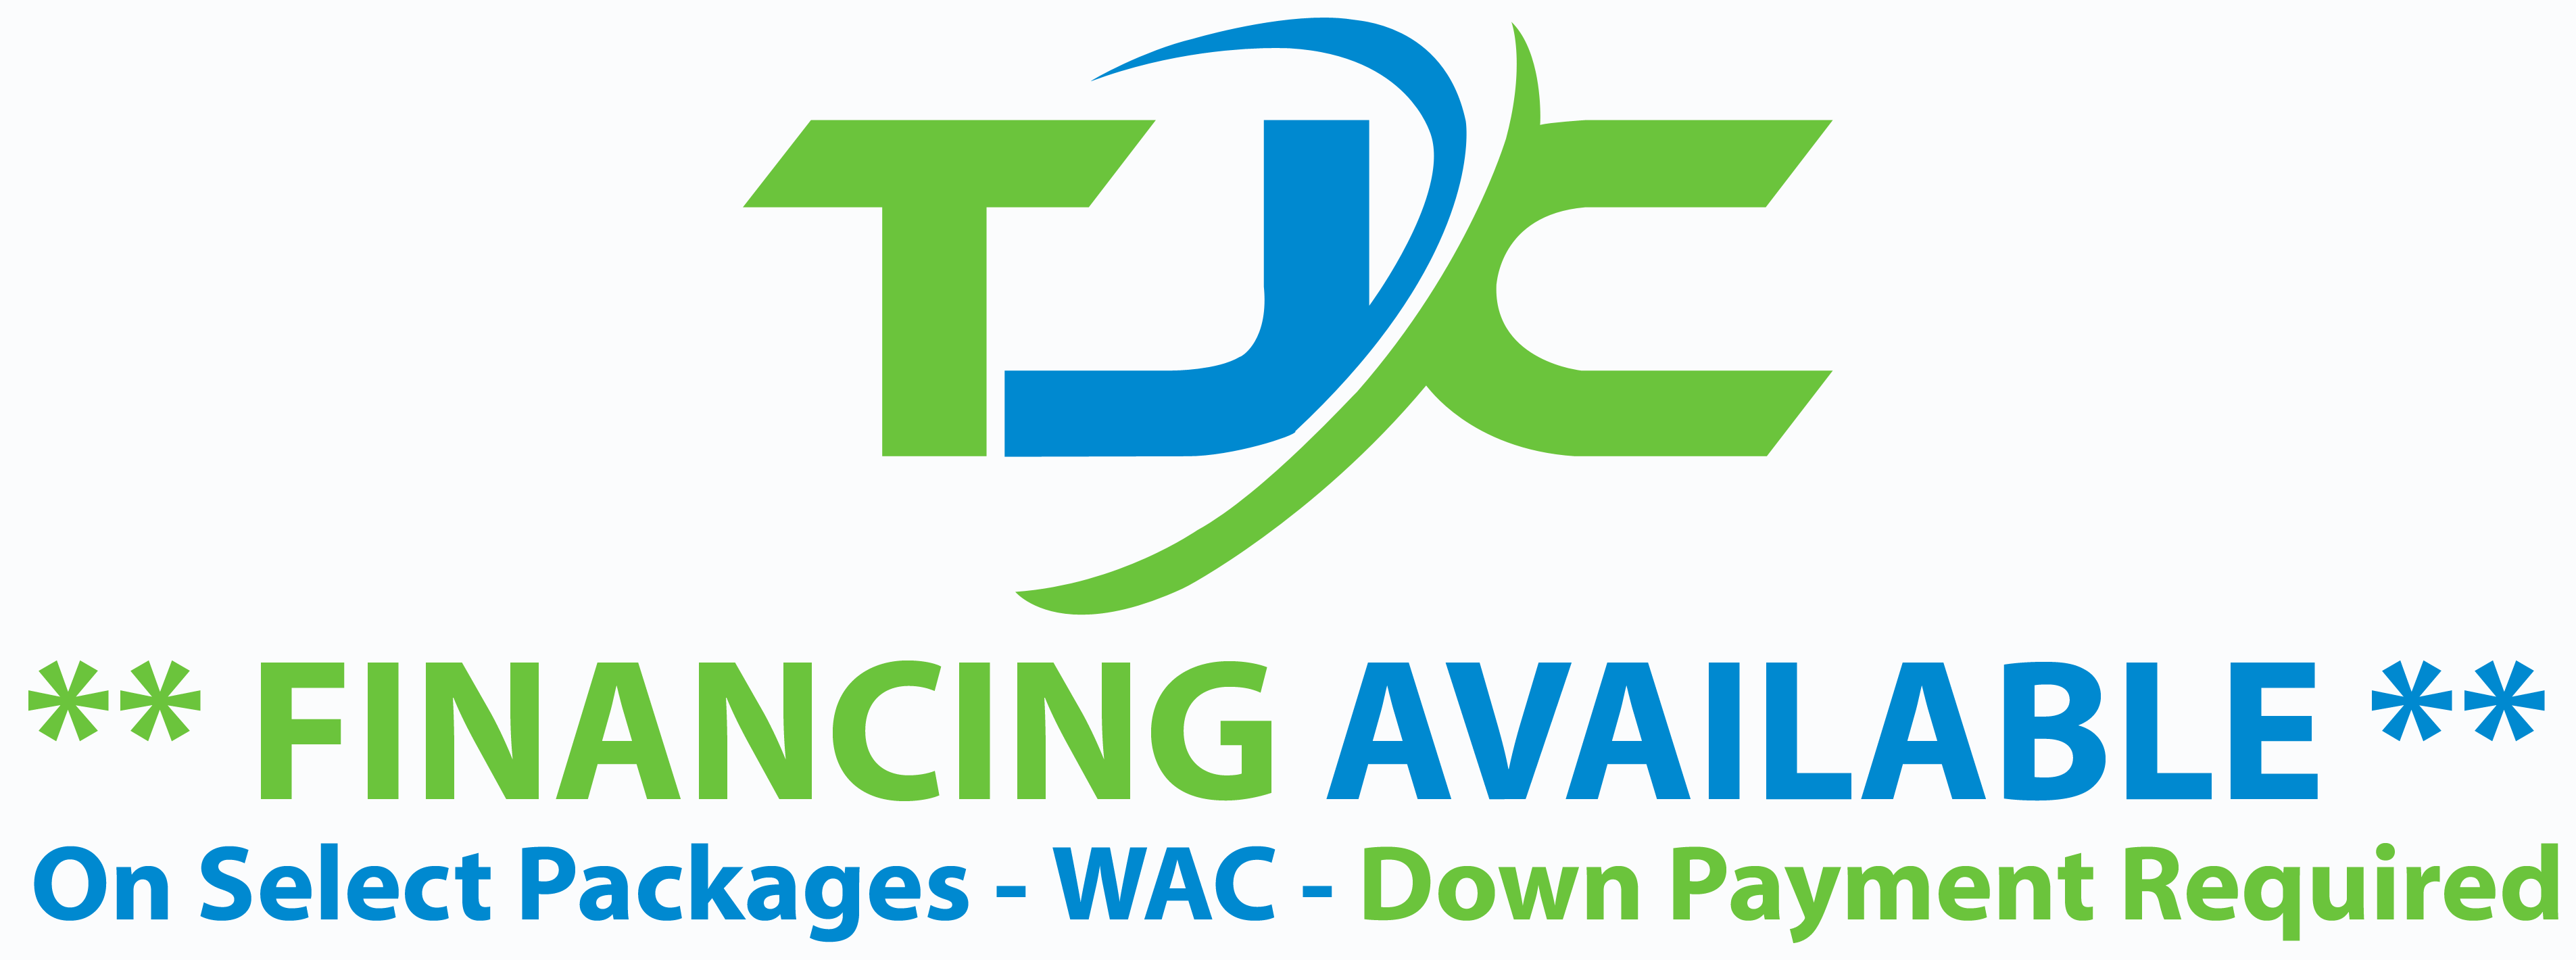 TJC Financing Available On Select Packages